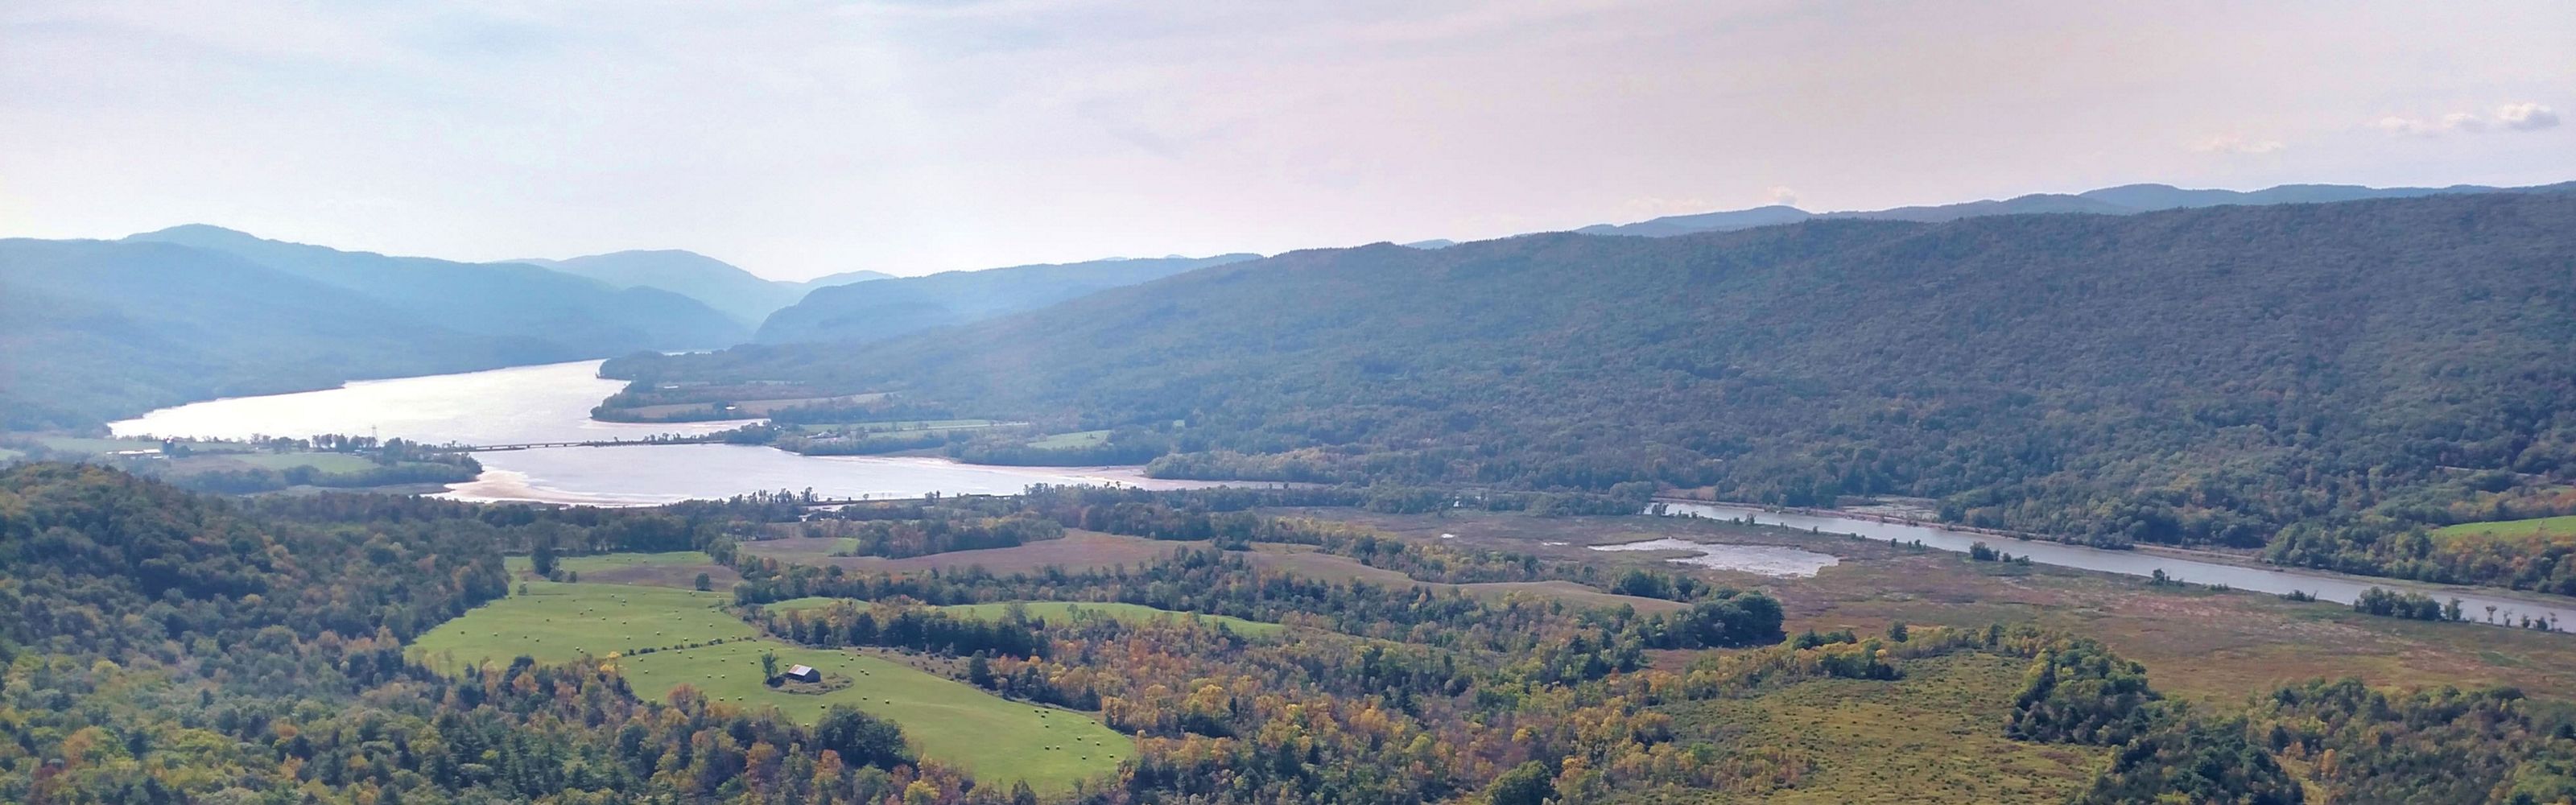 at Bald Mountain is the largest and most ecologically diverse natural area managed by The Nature Conservancy in Vermont.